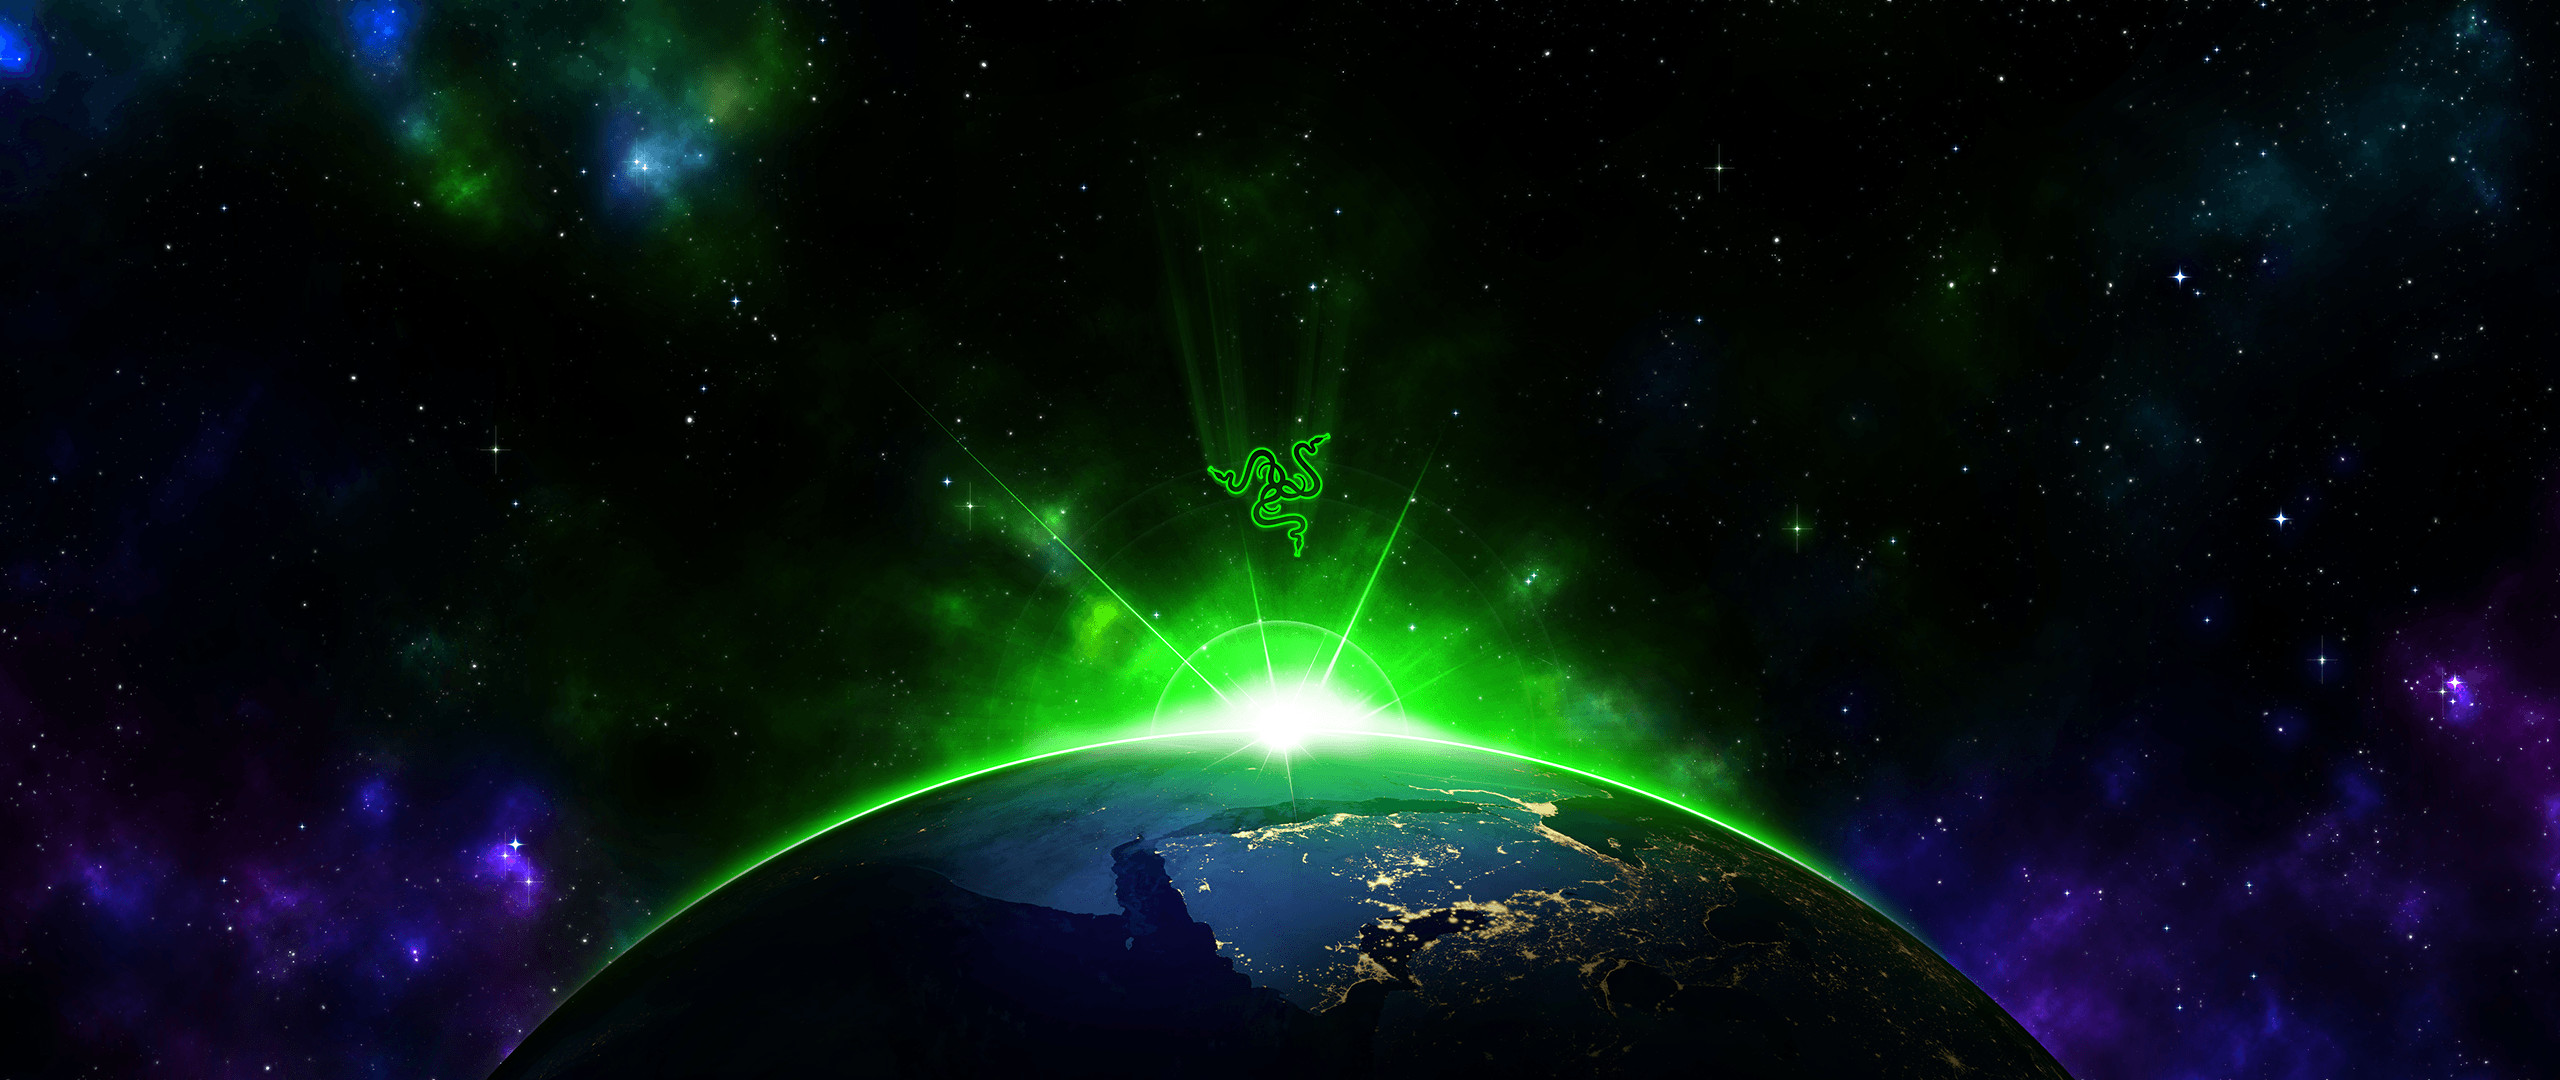 razer chroma wallpaper,nature,green,outer space,atmosphere,sky